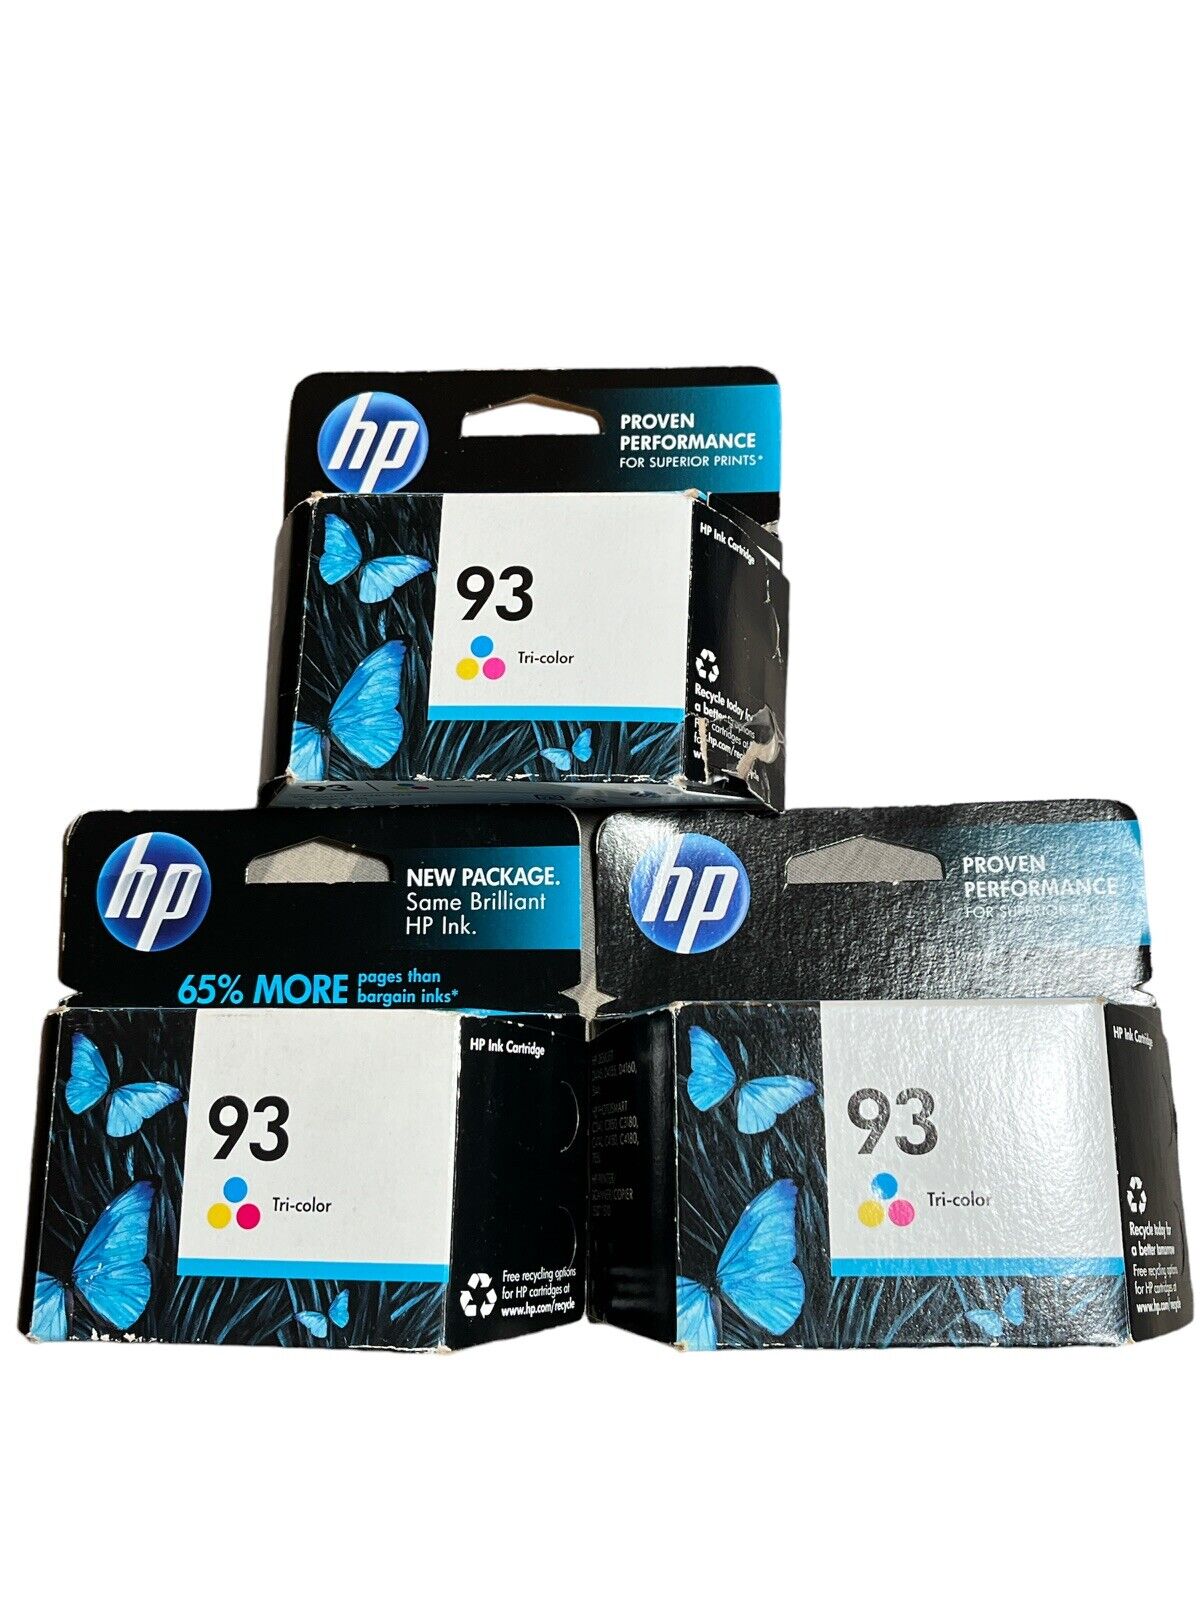 HP Ink Cartridge 93 Tri-Color 3 Pack New Factory Sealed Expired